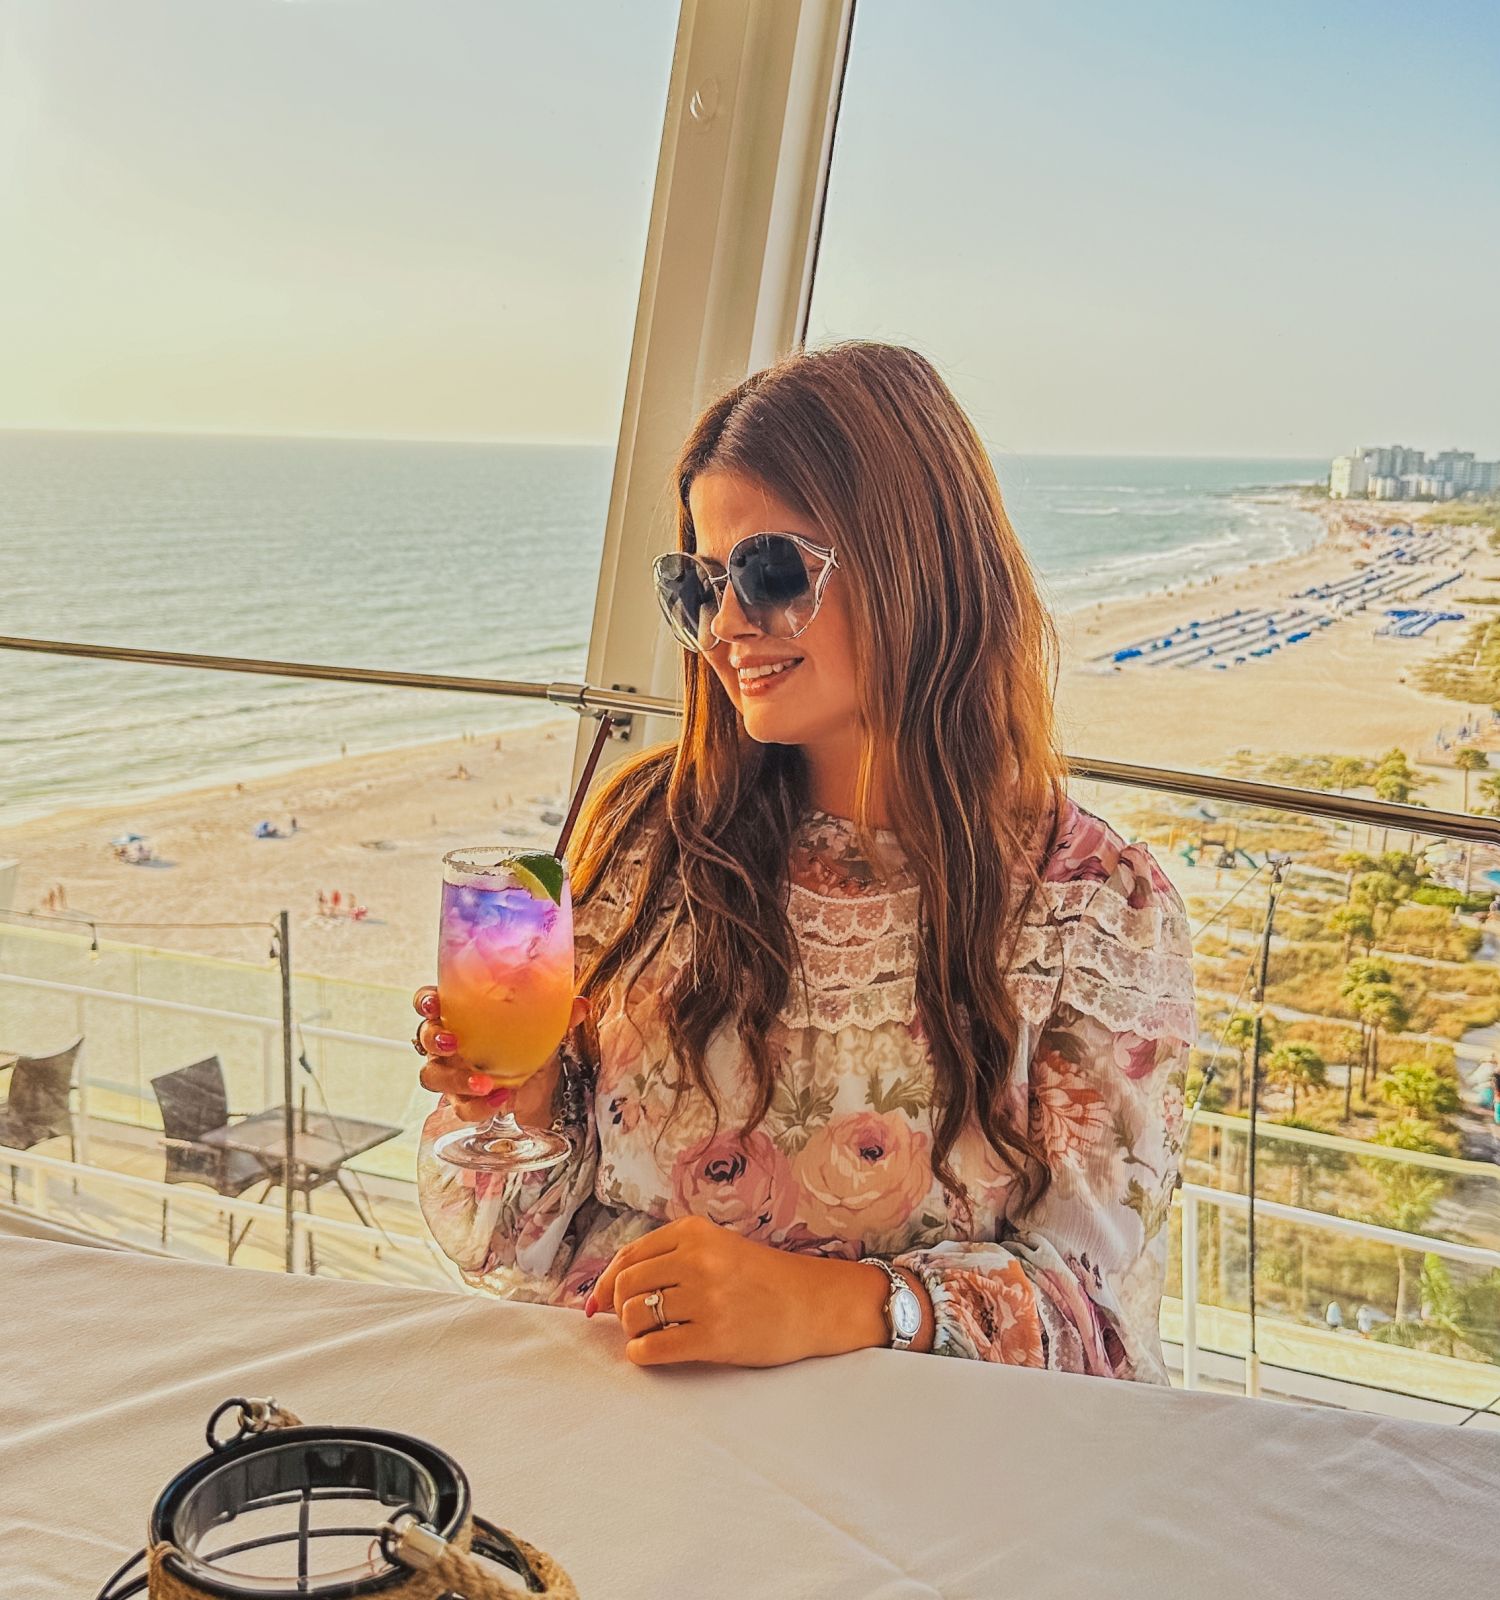 A woman with long hair and sunglasses holds a drink at a beachside table, with a stunning view of the ocean and sandy beach in the background.